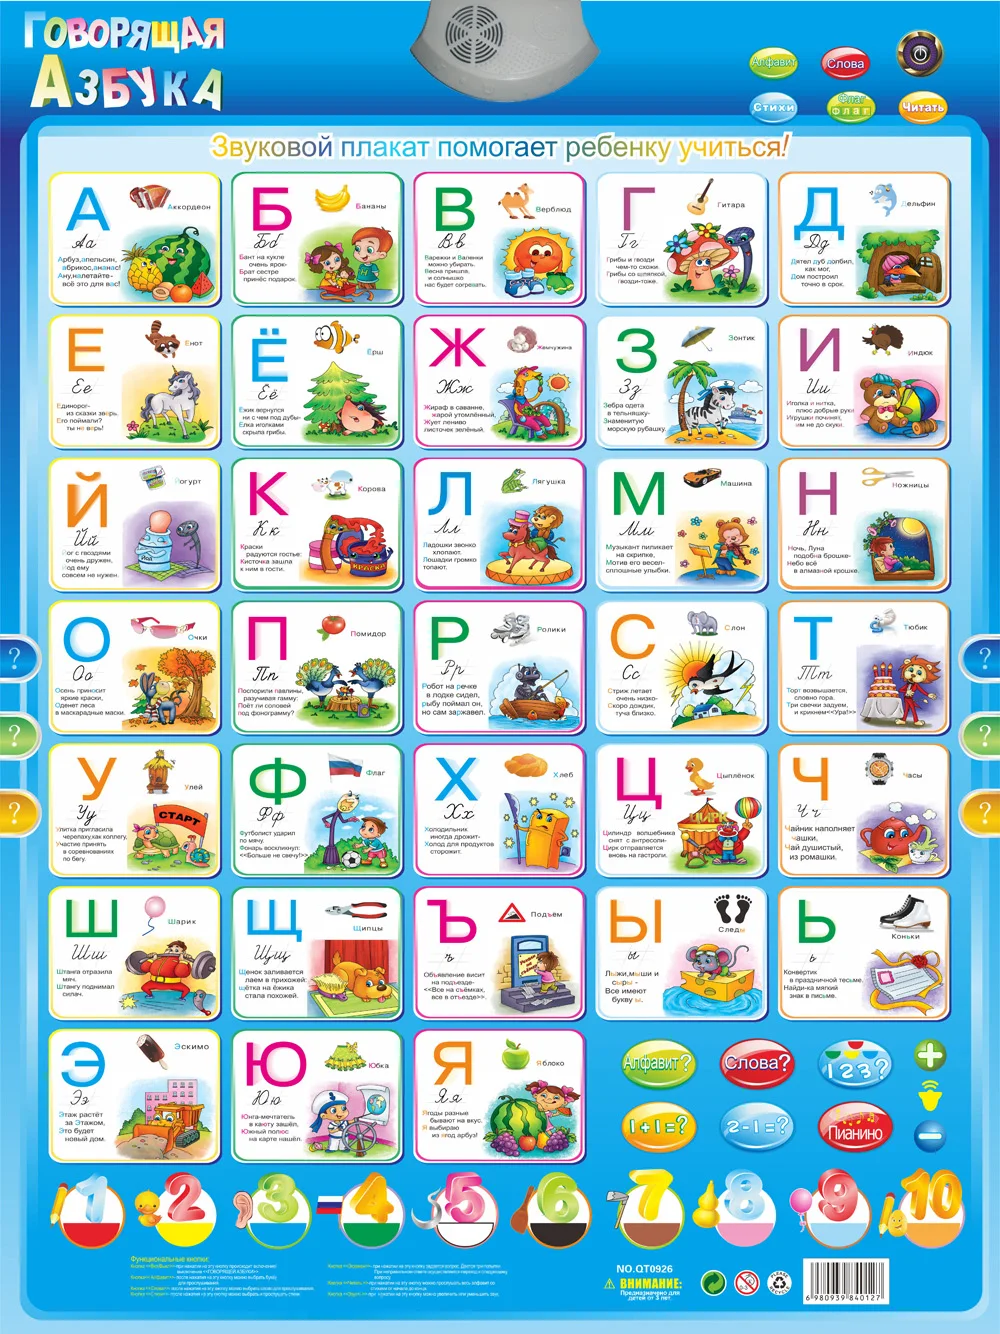 

Russian Alphabet Poster,Electronic Interactive Alphabet Wall Chart,Talking ABC Best Educational Toy for Toddler Preschool Gift